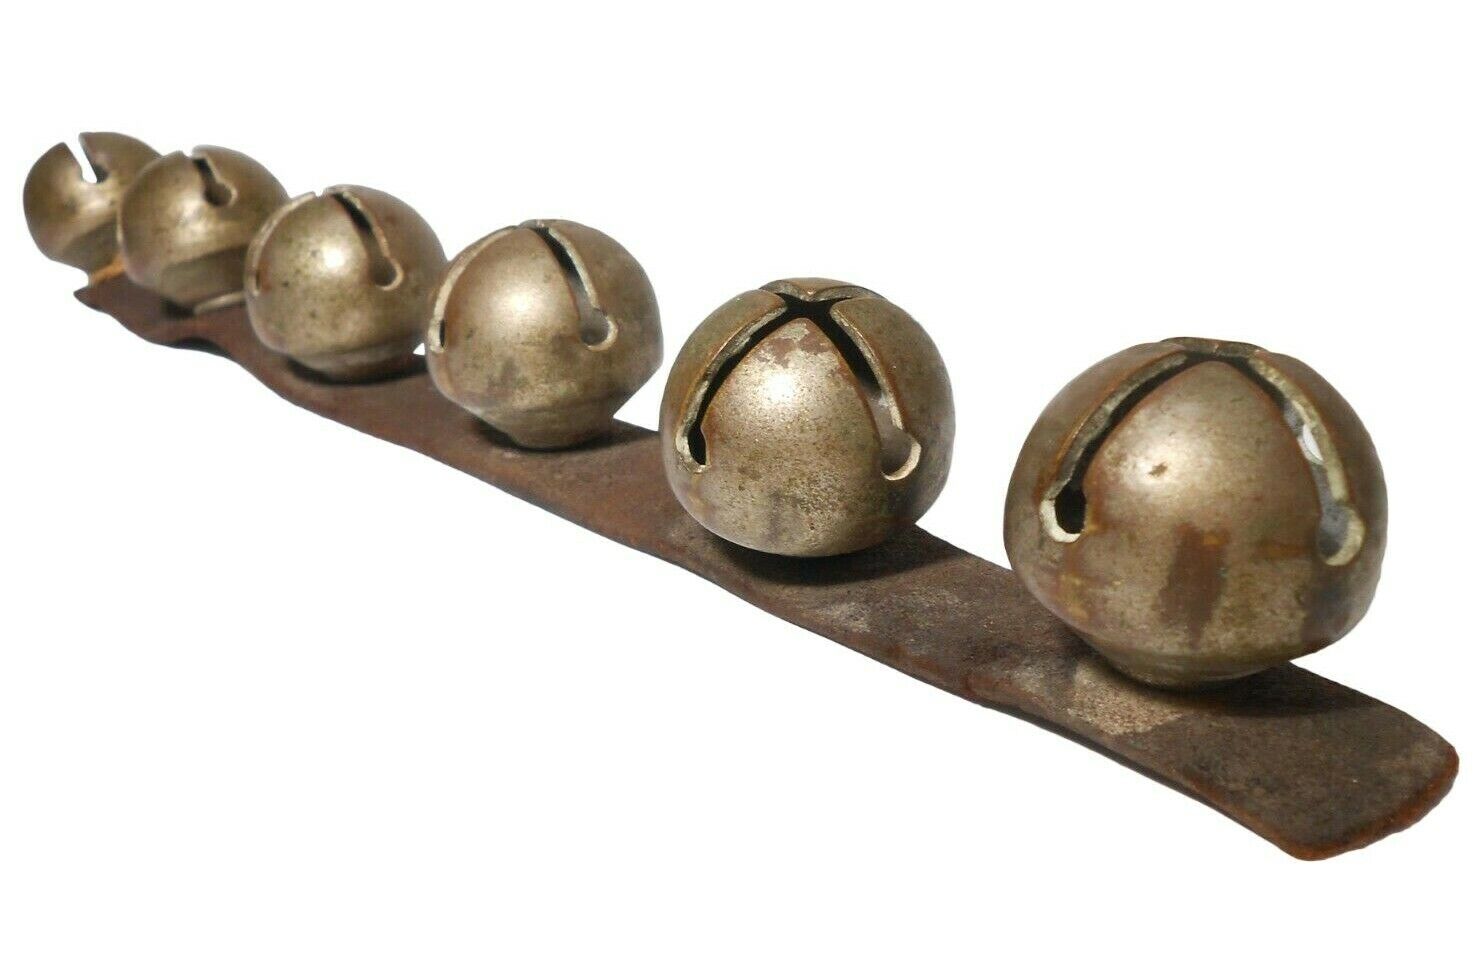 EARLY 20TH C AMERICAN ANTIQUE PRIMITIVE 6 PC METAL SLEIGH BELLS ON LEATHER STRAP